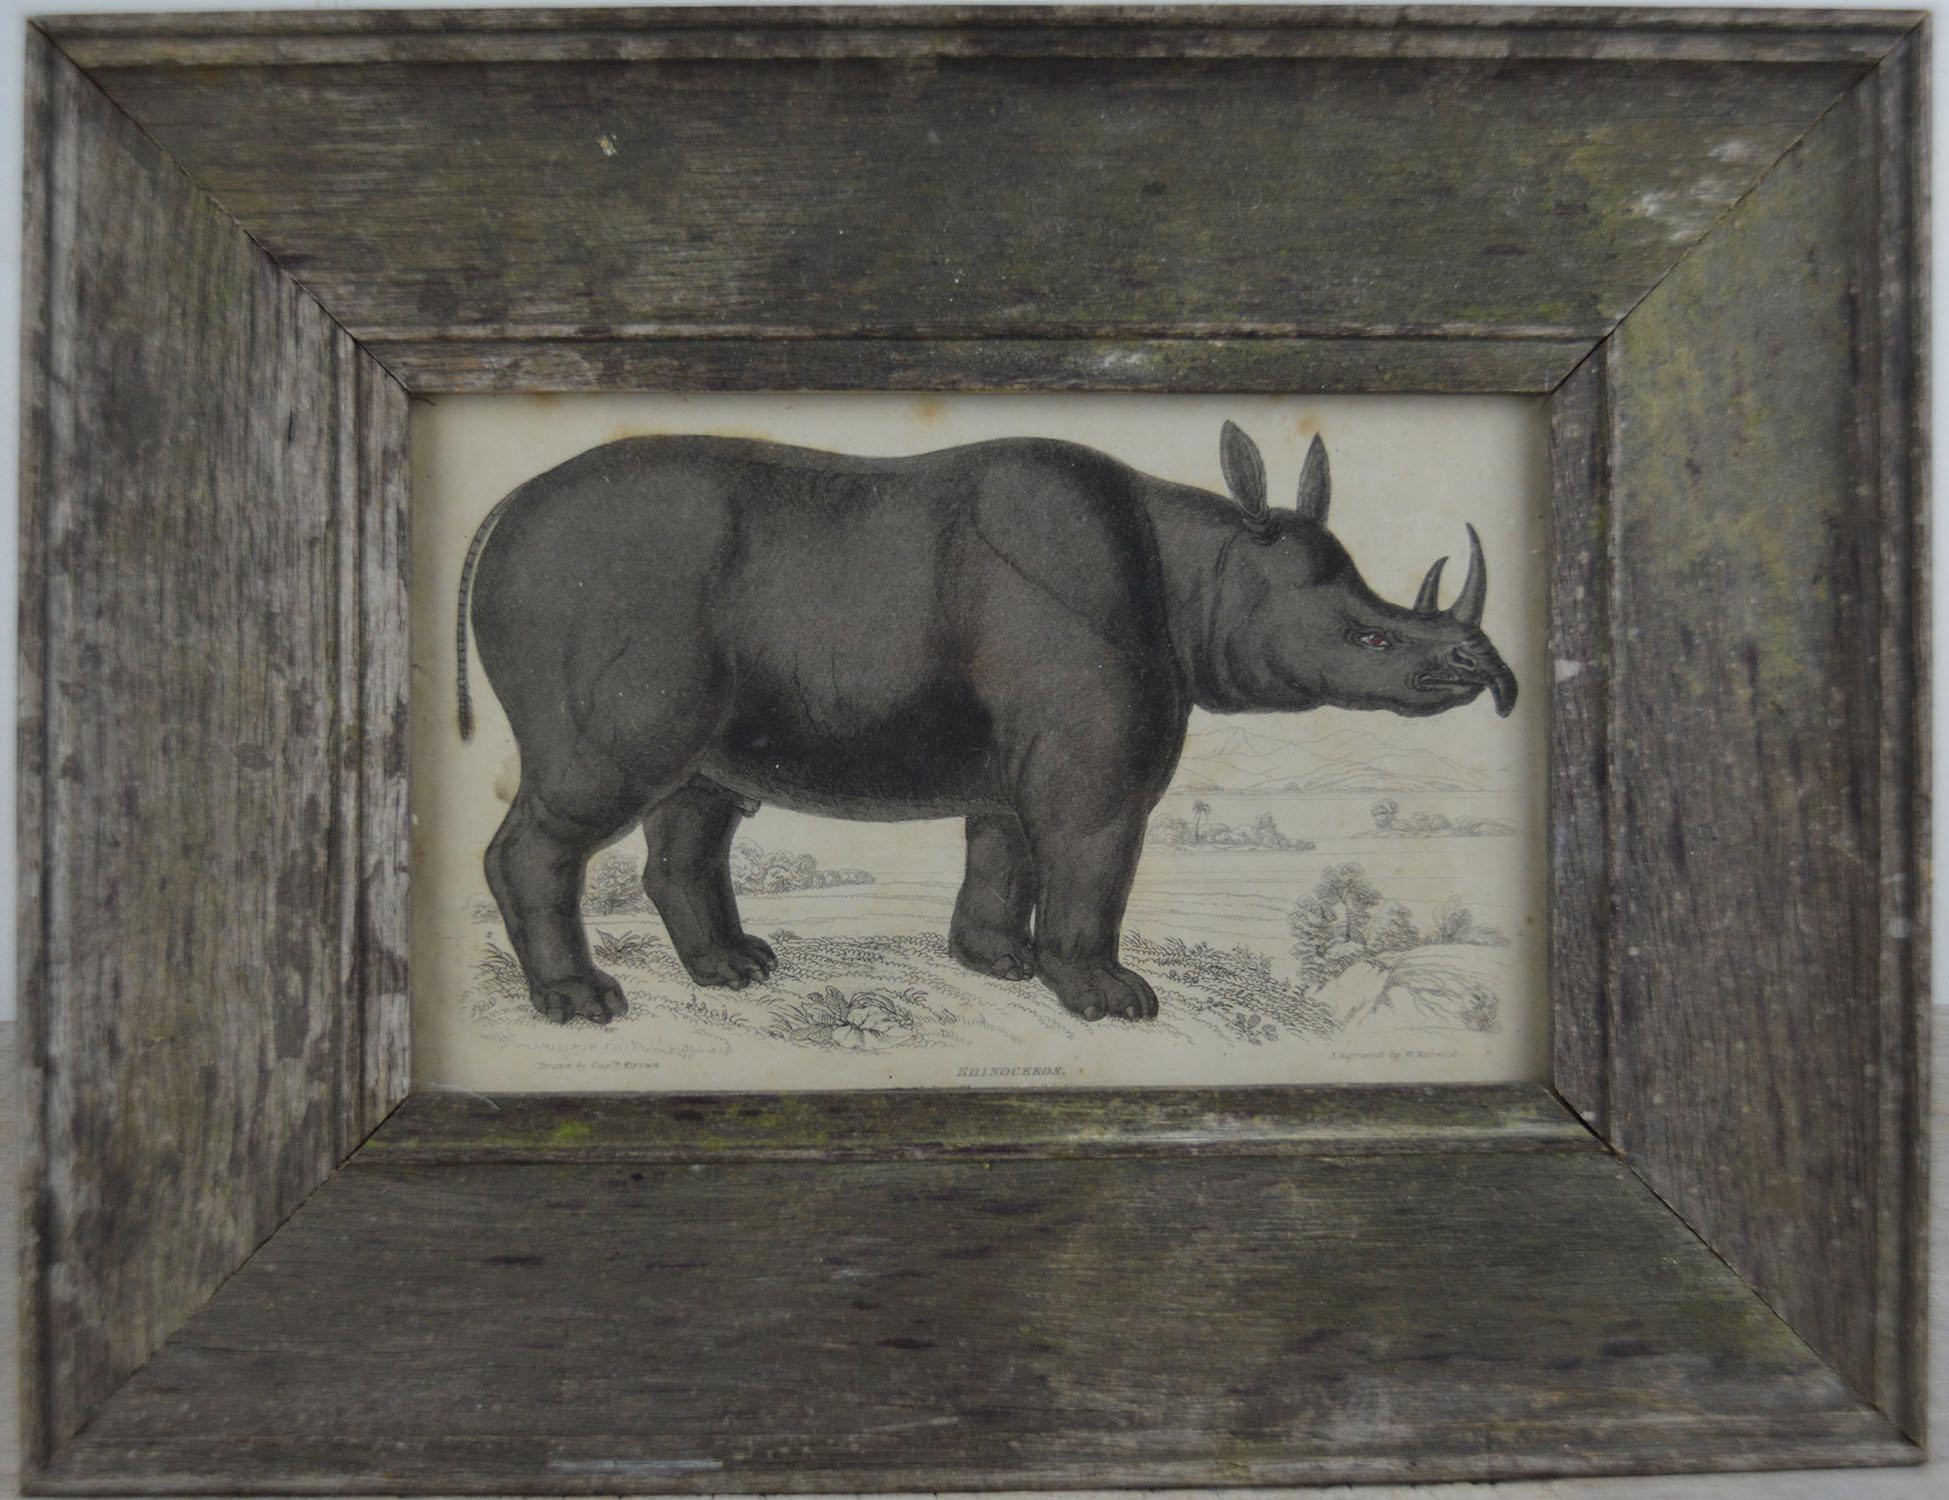 Great image of a rhino presented in an antique distressed oak frame.

Original hand colored lithograph after Cpt. brown.

Published by Smith, Elder, 1830s.

Free shipping.

 